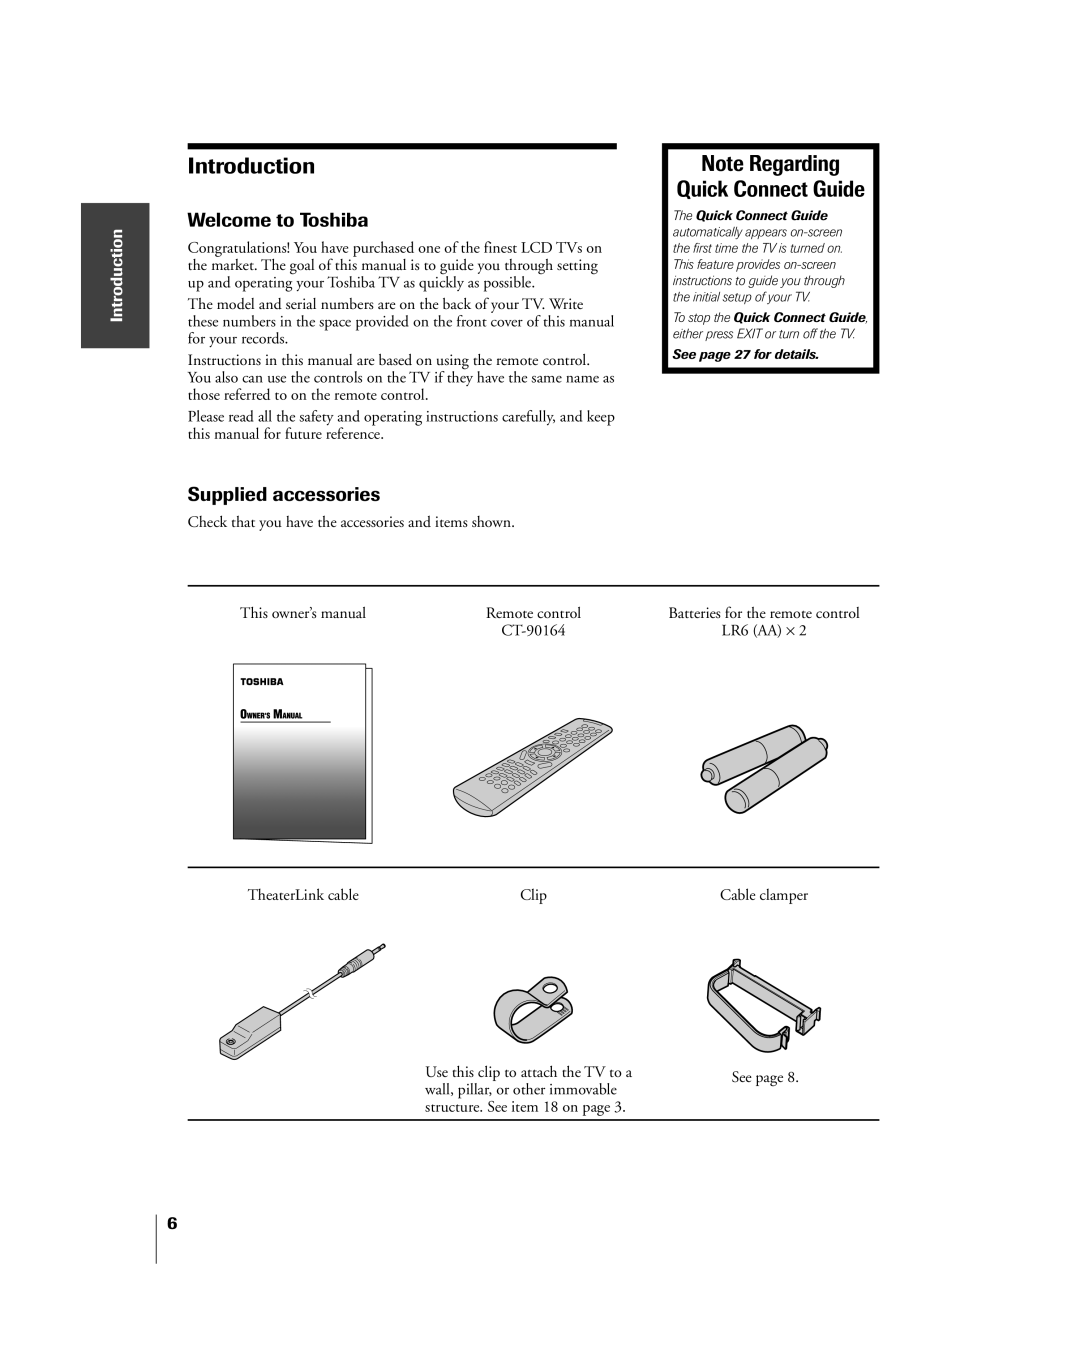 Toshiba 26HL84 owner manual Introduction, Note Regarding Quick Connect Guide, Welcome to Toshiba, Supplied accessories 